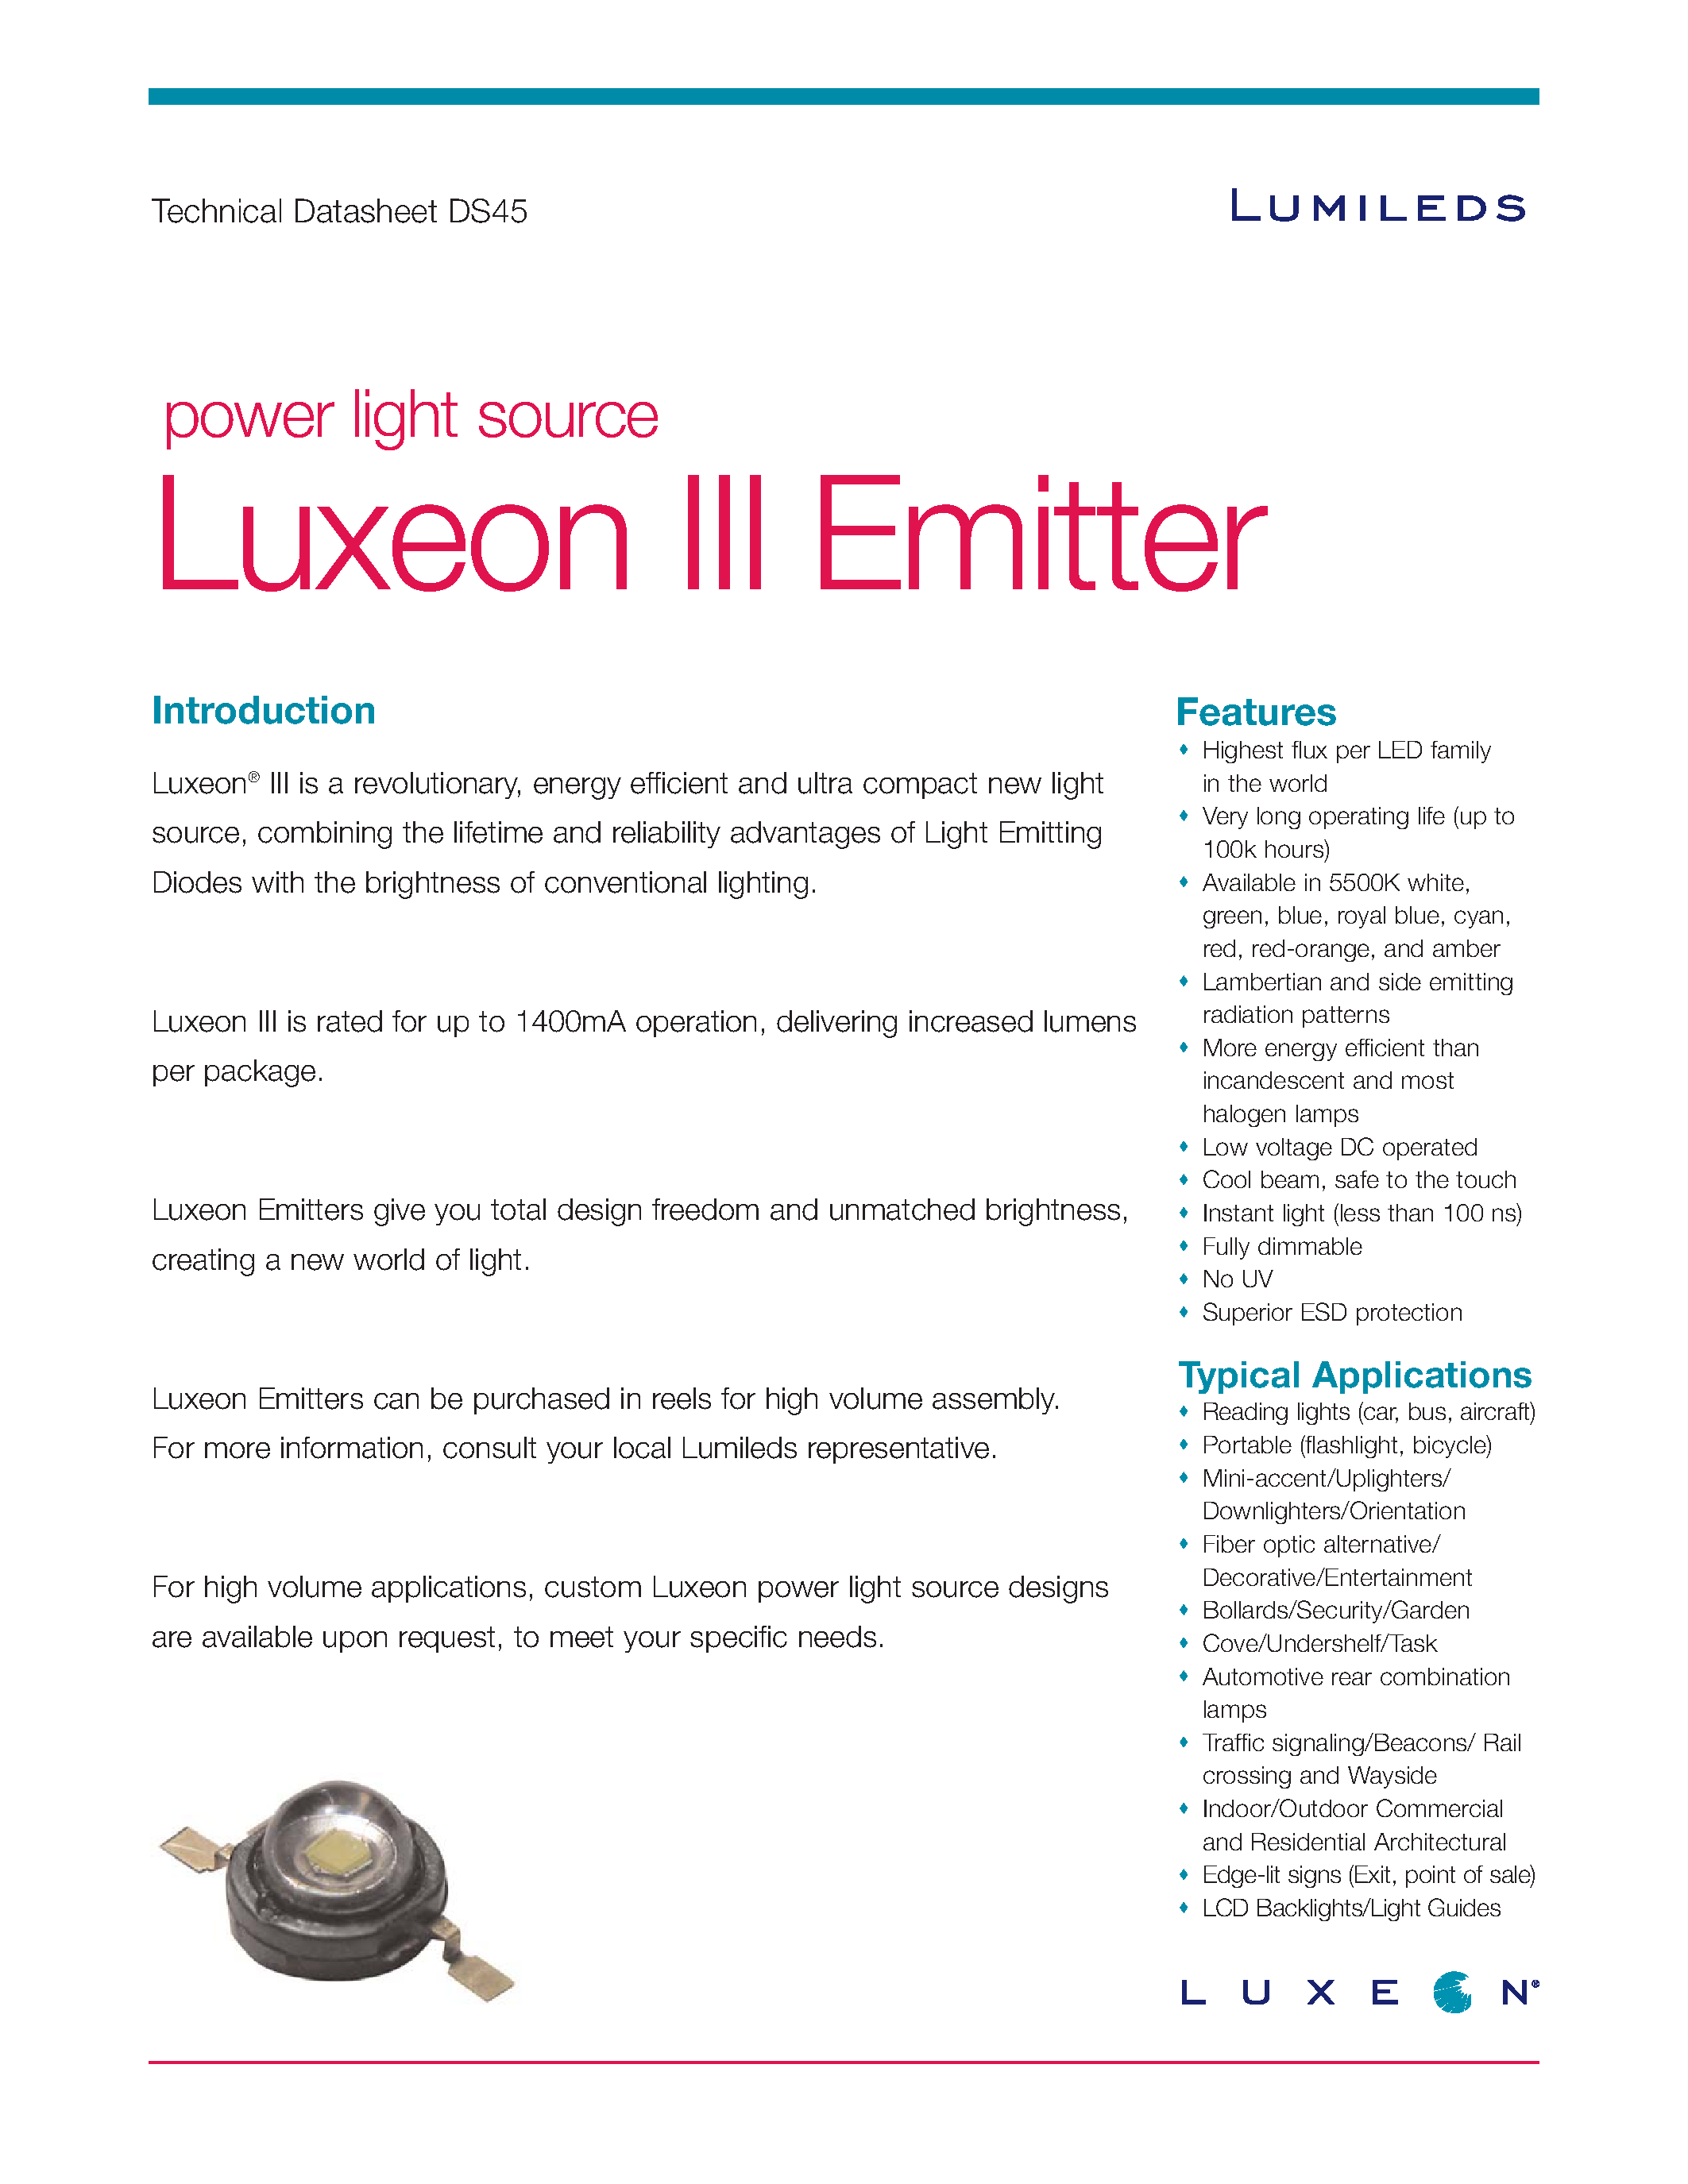 Datasheet LXHL-DB09 - (LXHL-xxxx) Combining the lifetime and reliability Advantages of Light Emitting Diodes page 1